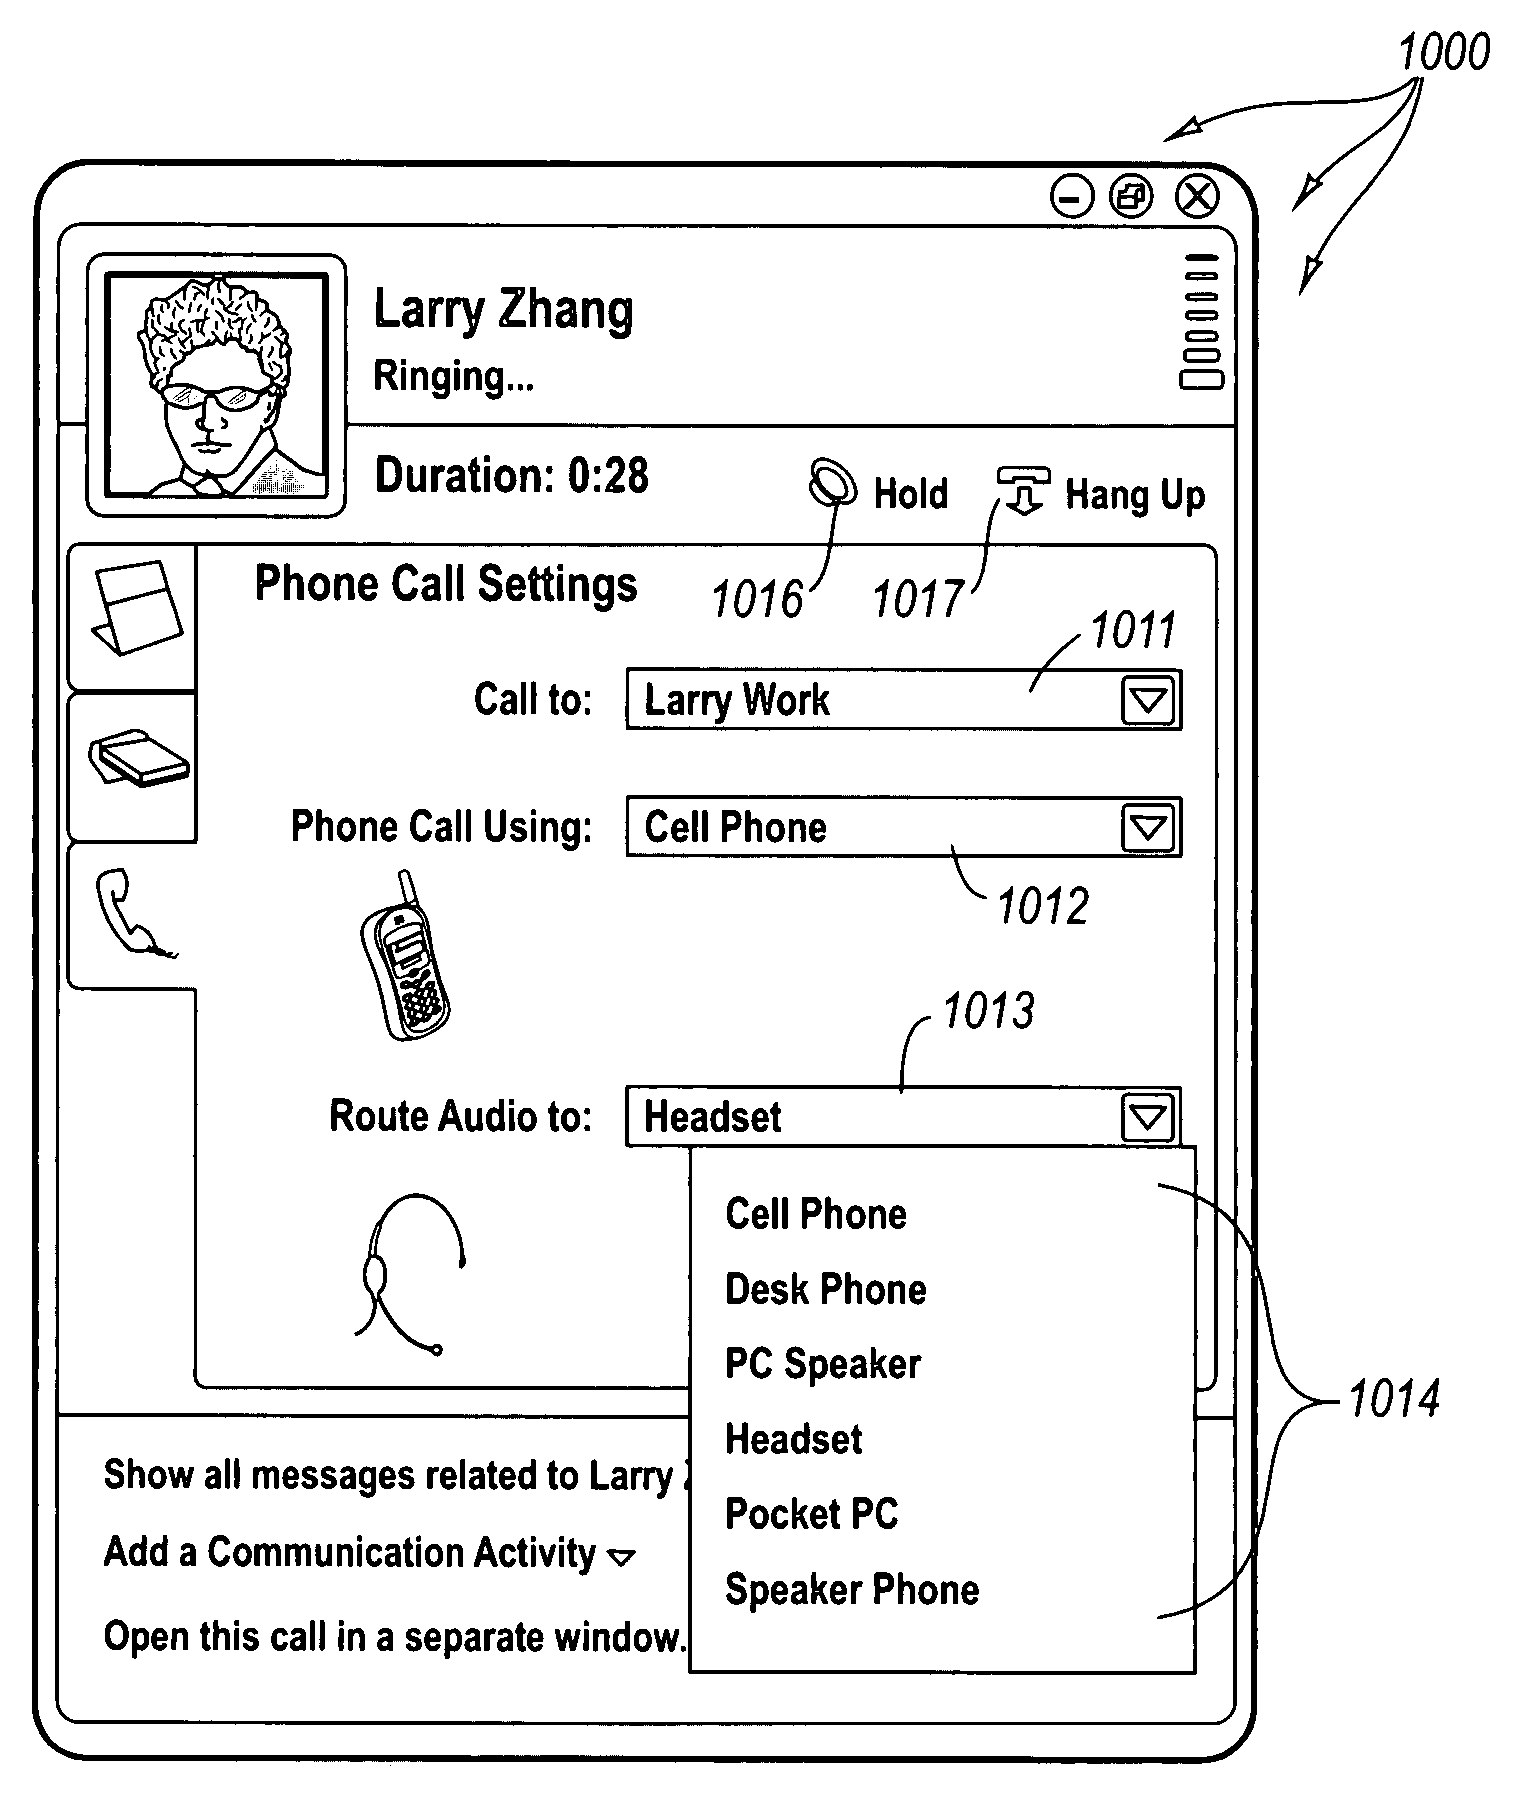 Integrated messaging user interface with message-based logging